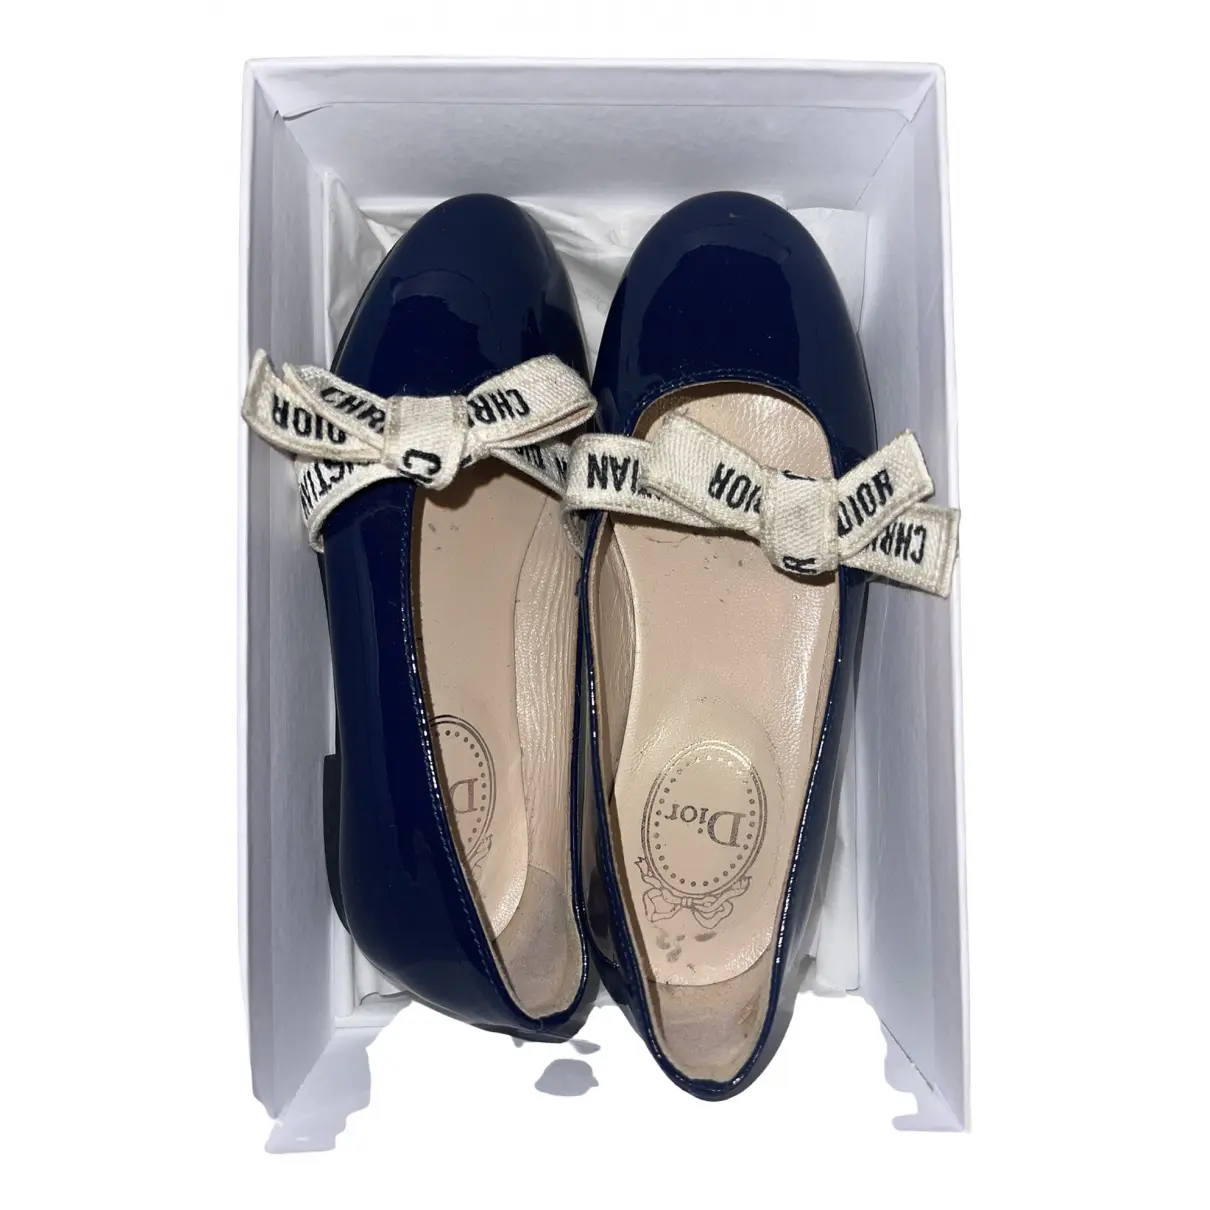 Buy Baby Dior Leather ballet flats online